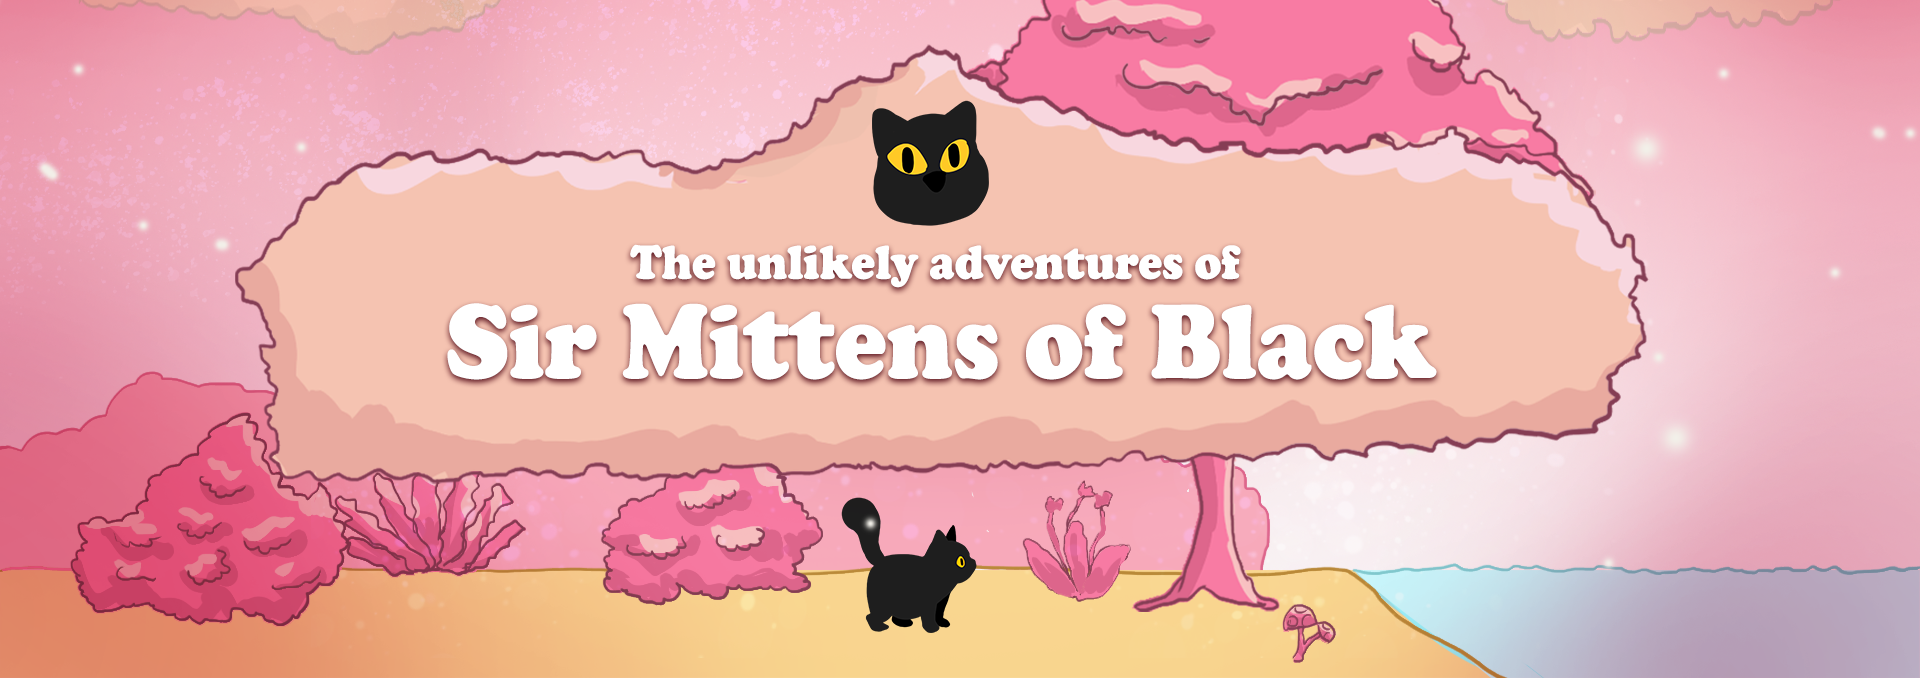 The unlikely adventures of Sir Mittens of Black